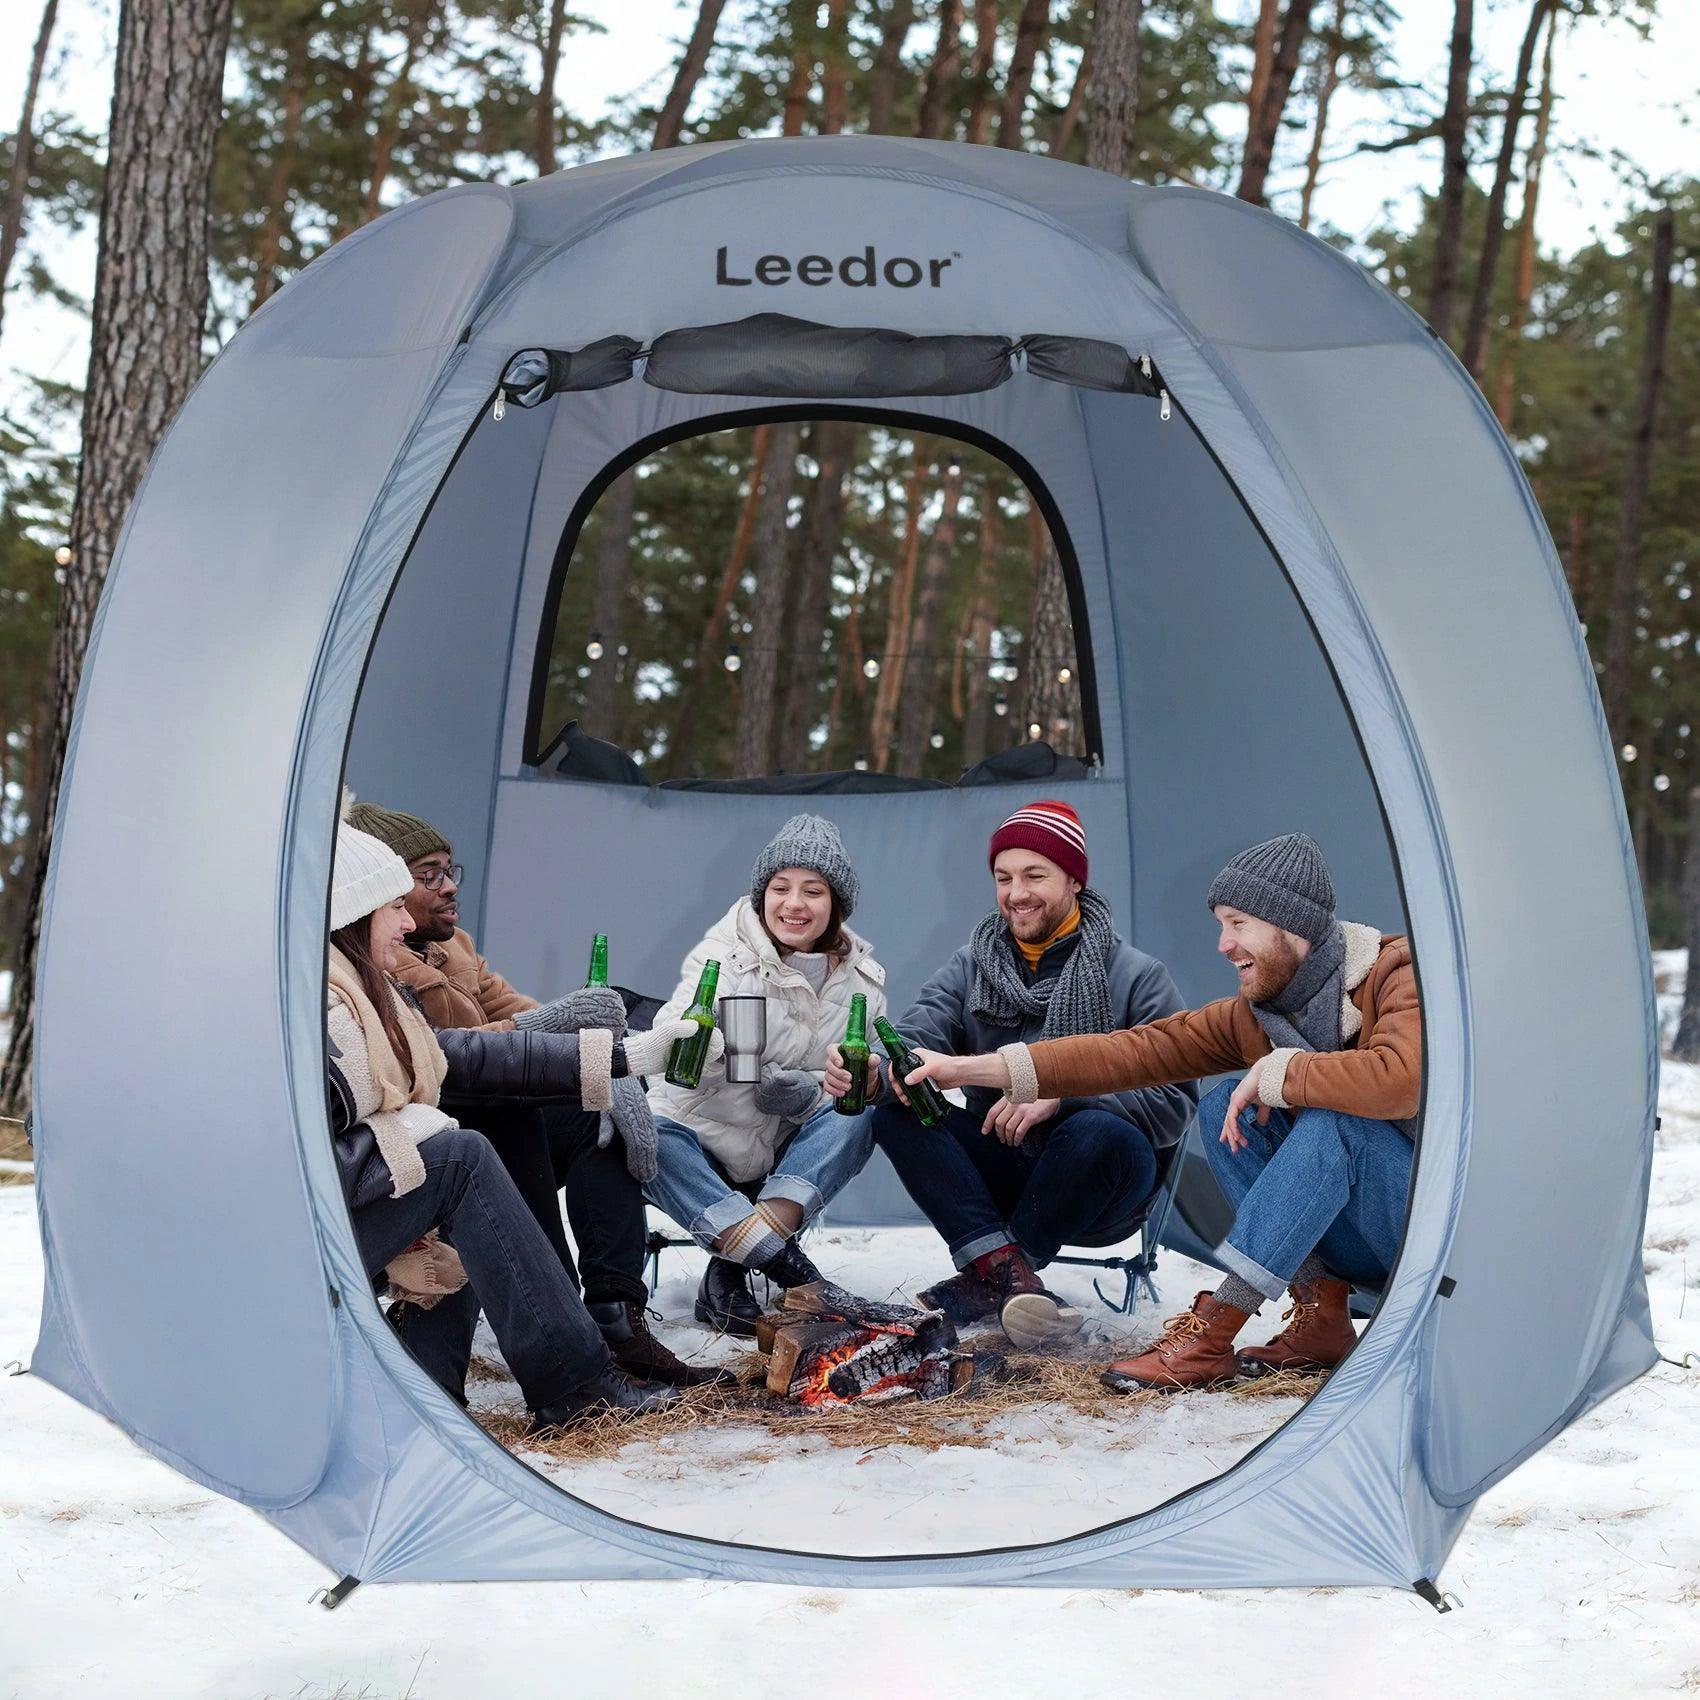 Stay warm on snowy days in the leedor pop-up tent